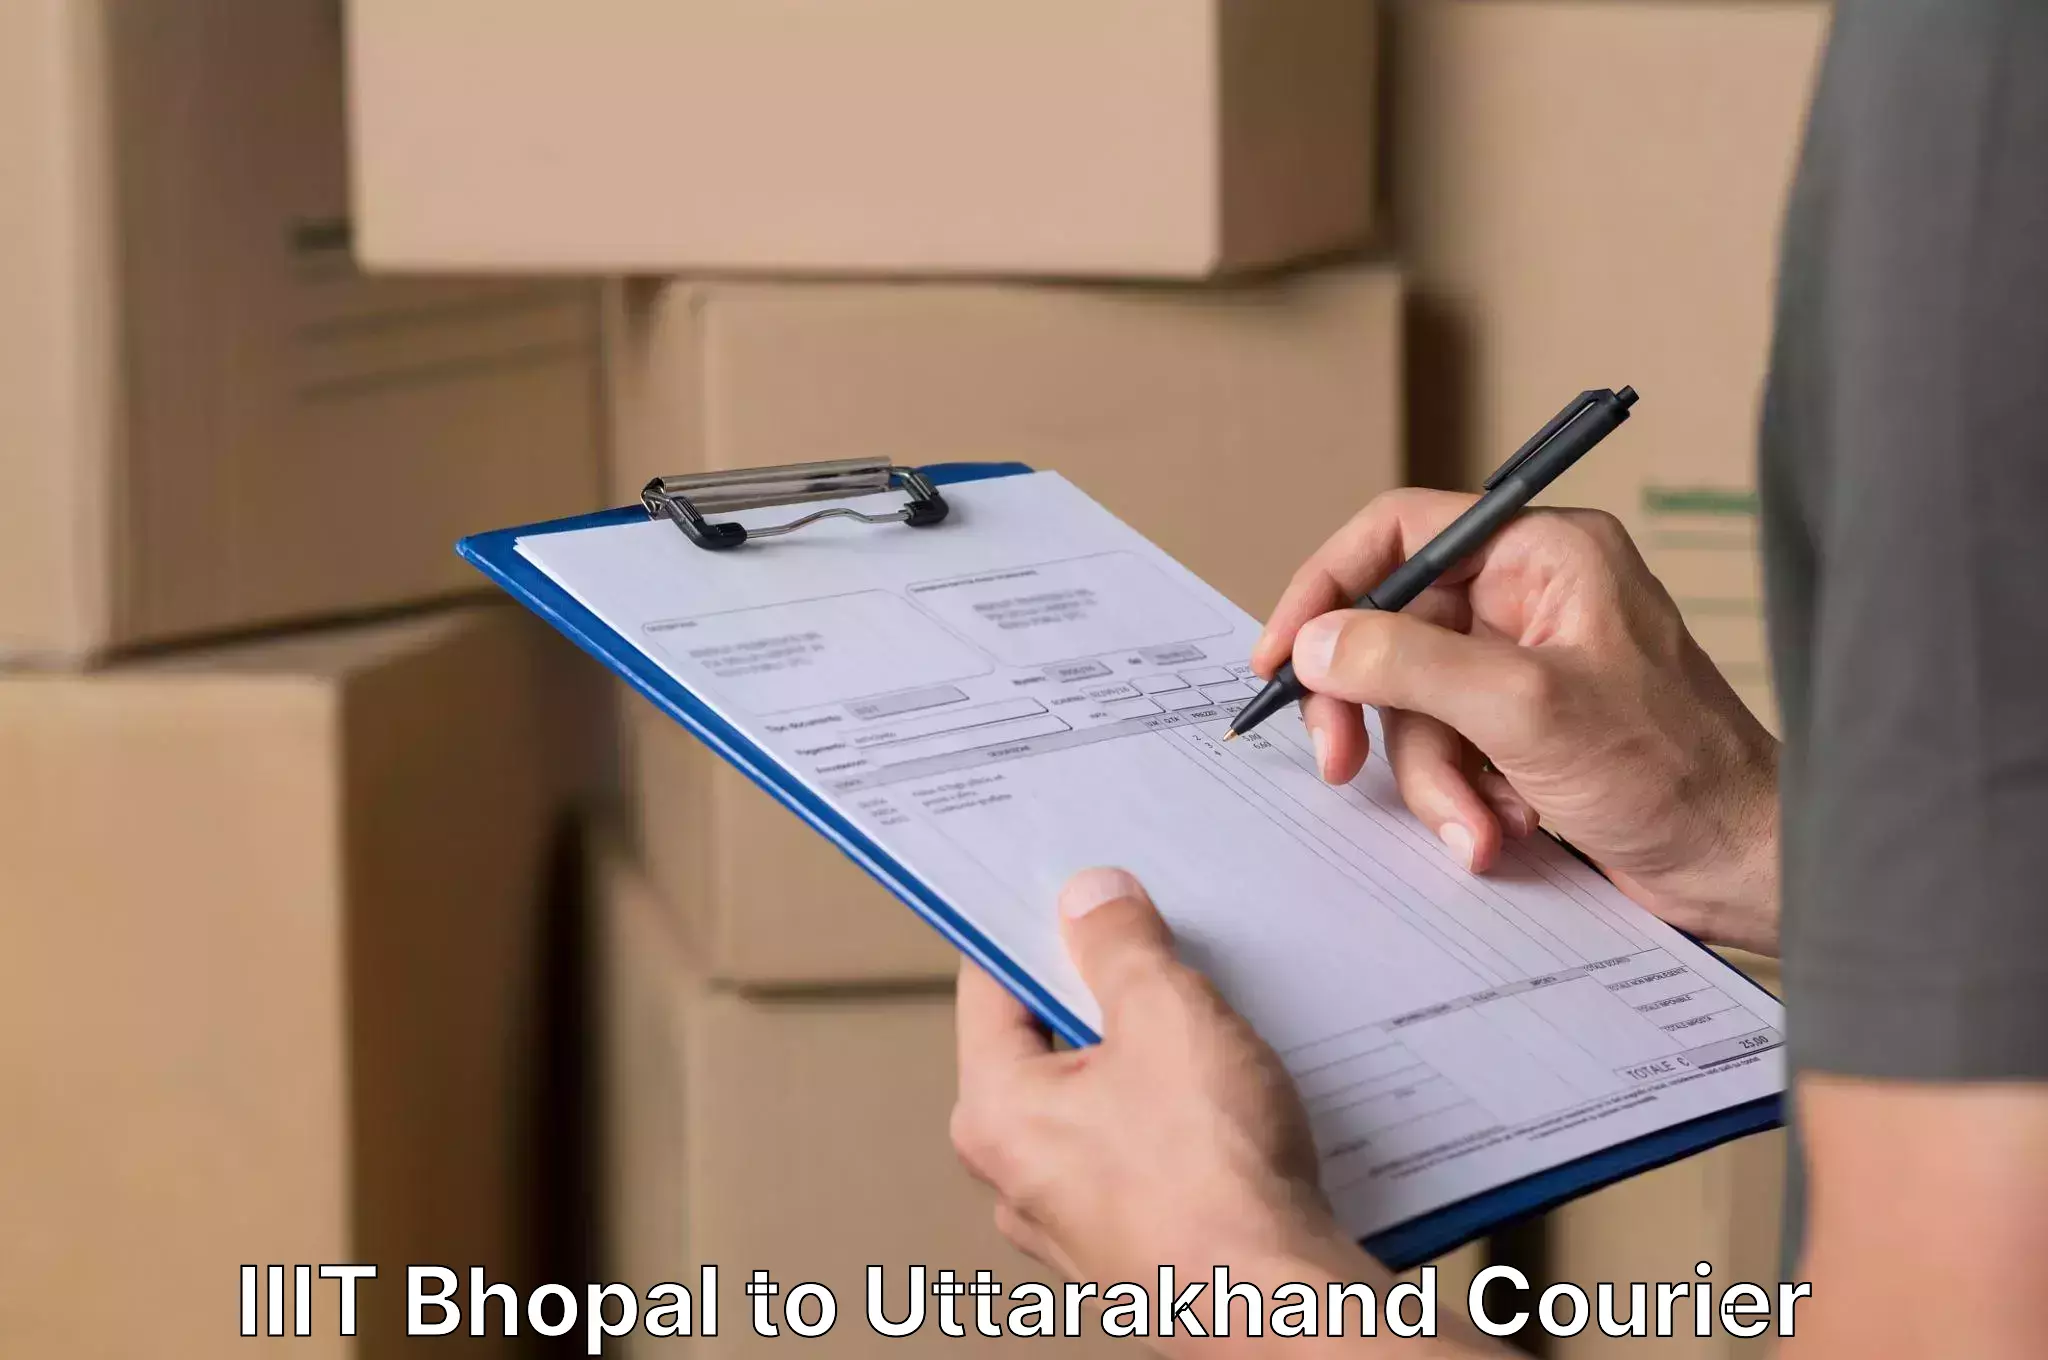 Customized relocation services IIIT Bhopal to Nainital